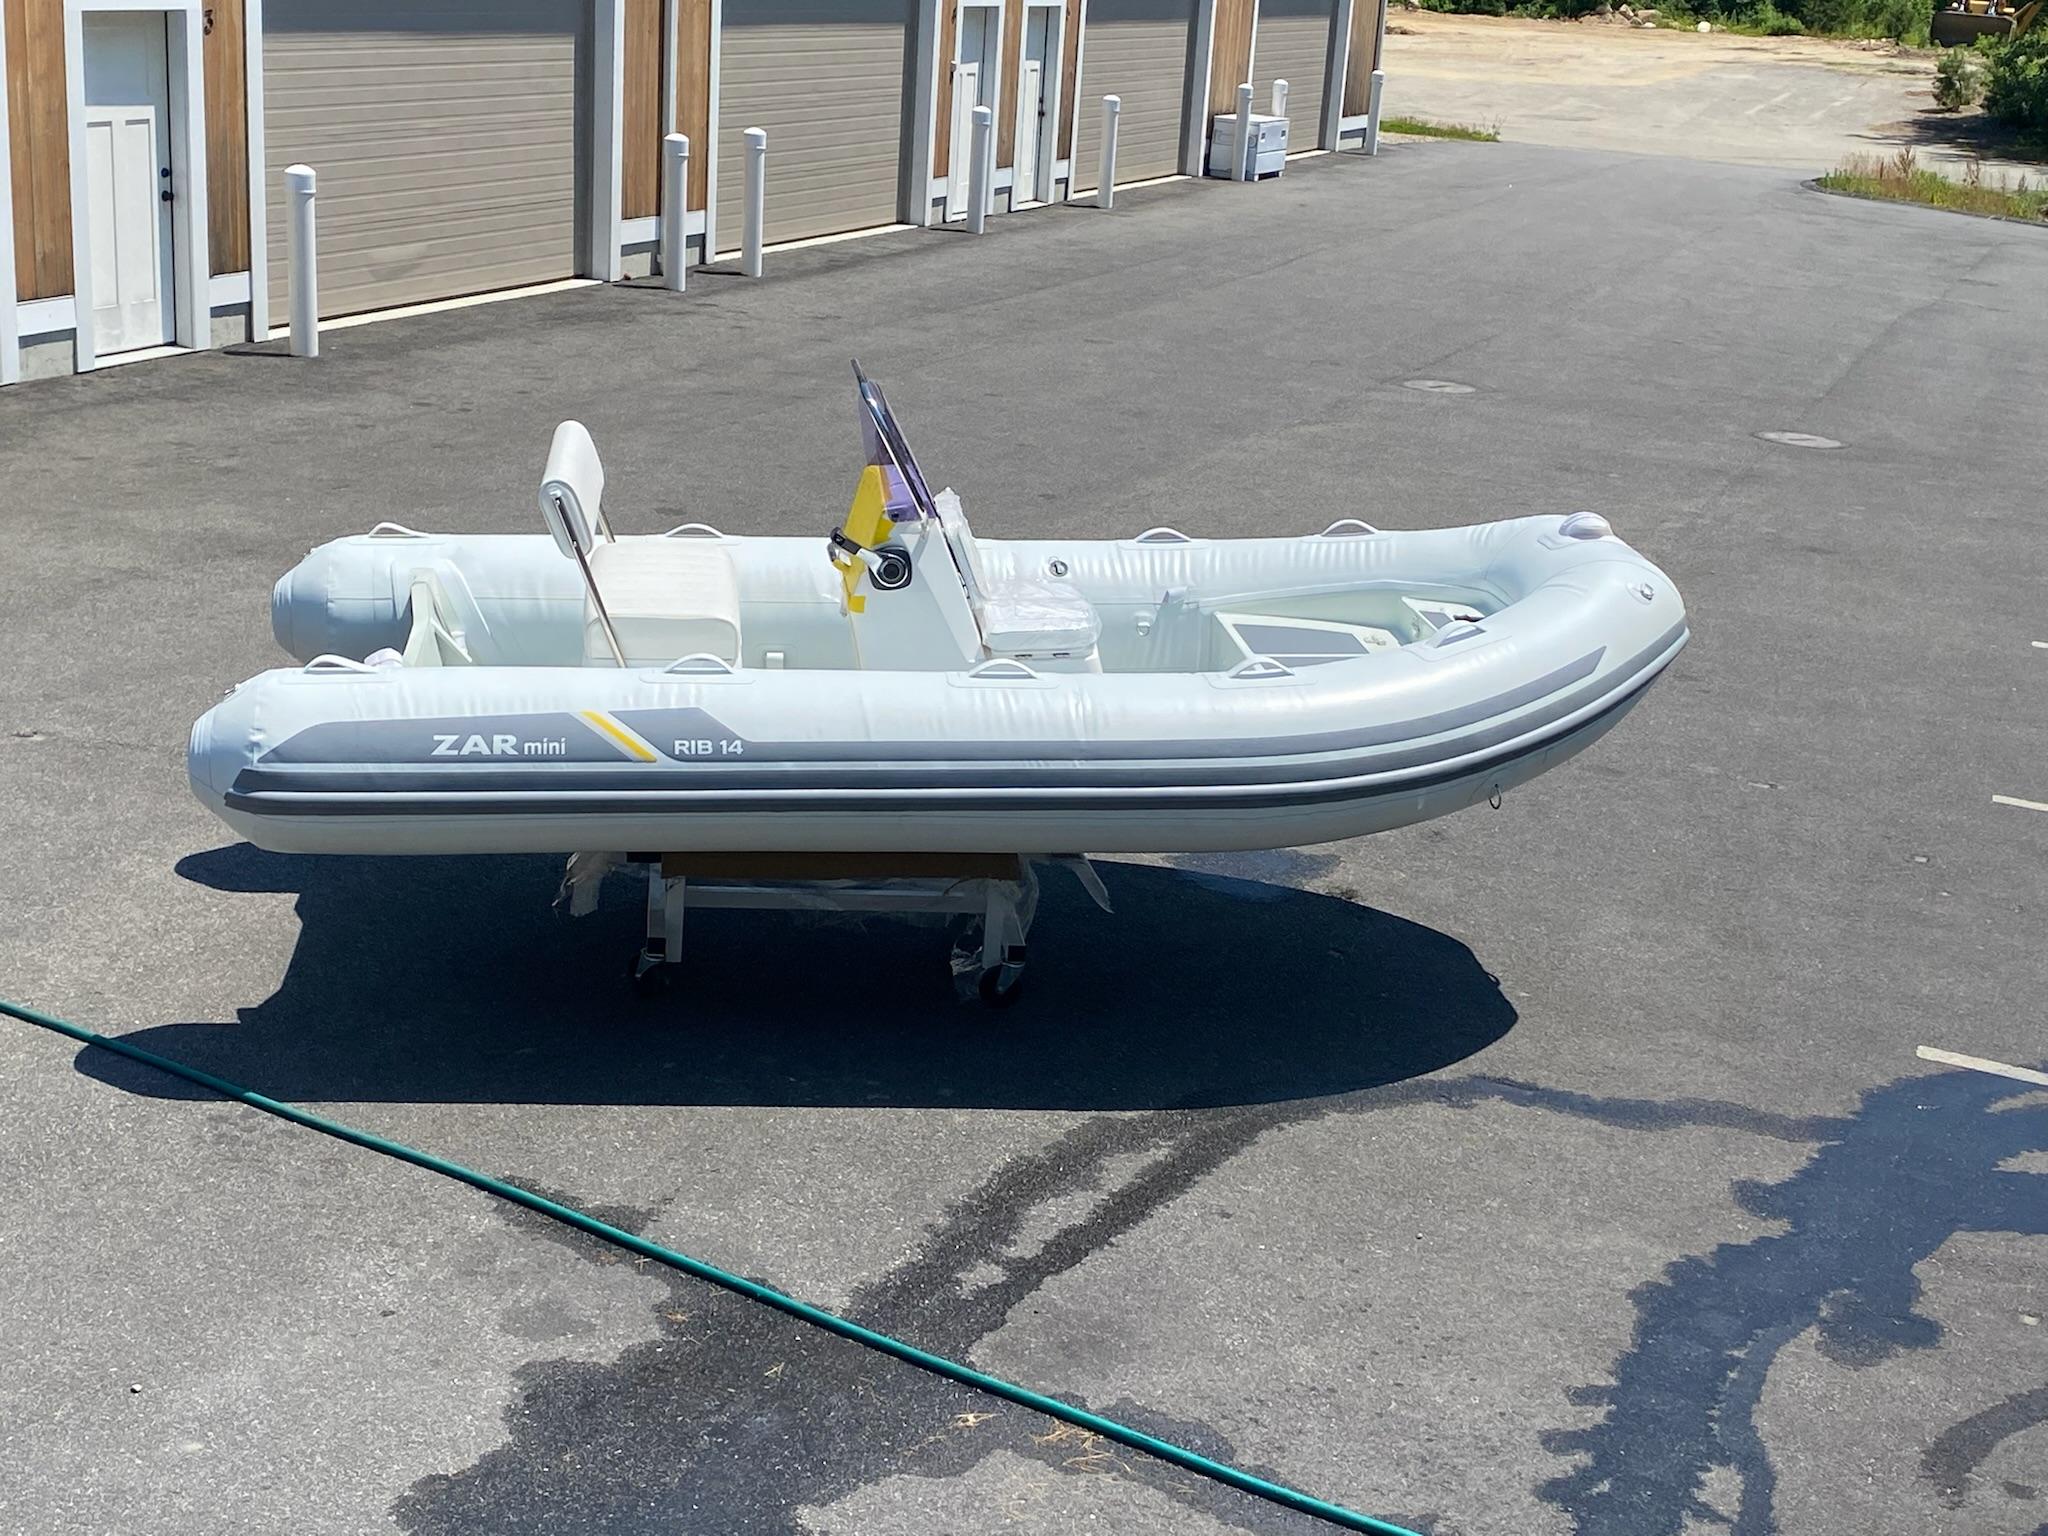 RIB 14 rigged with console